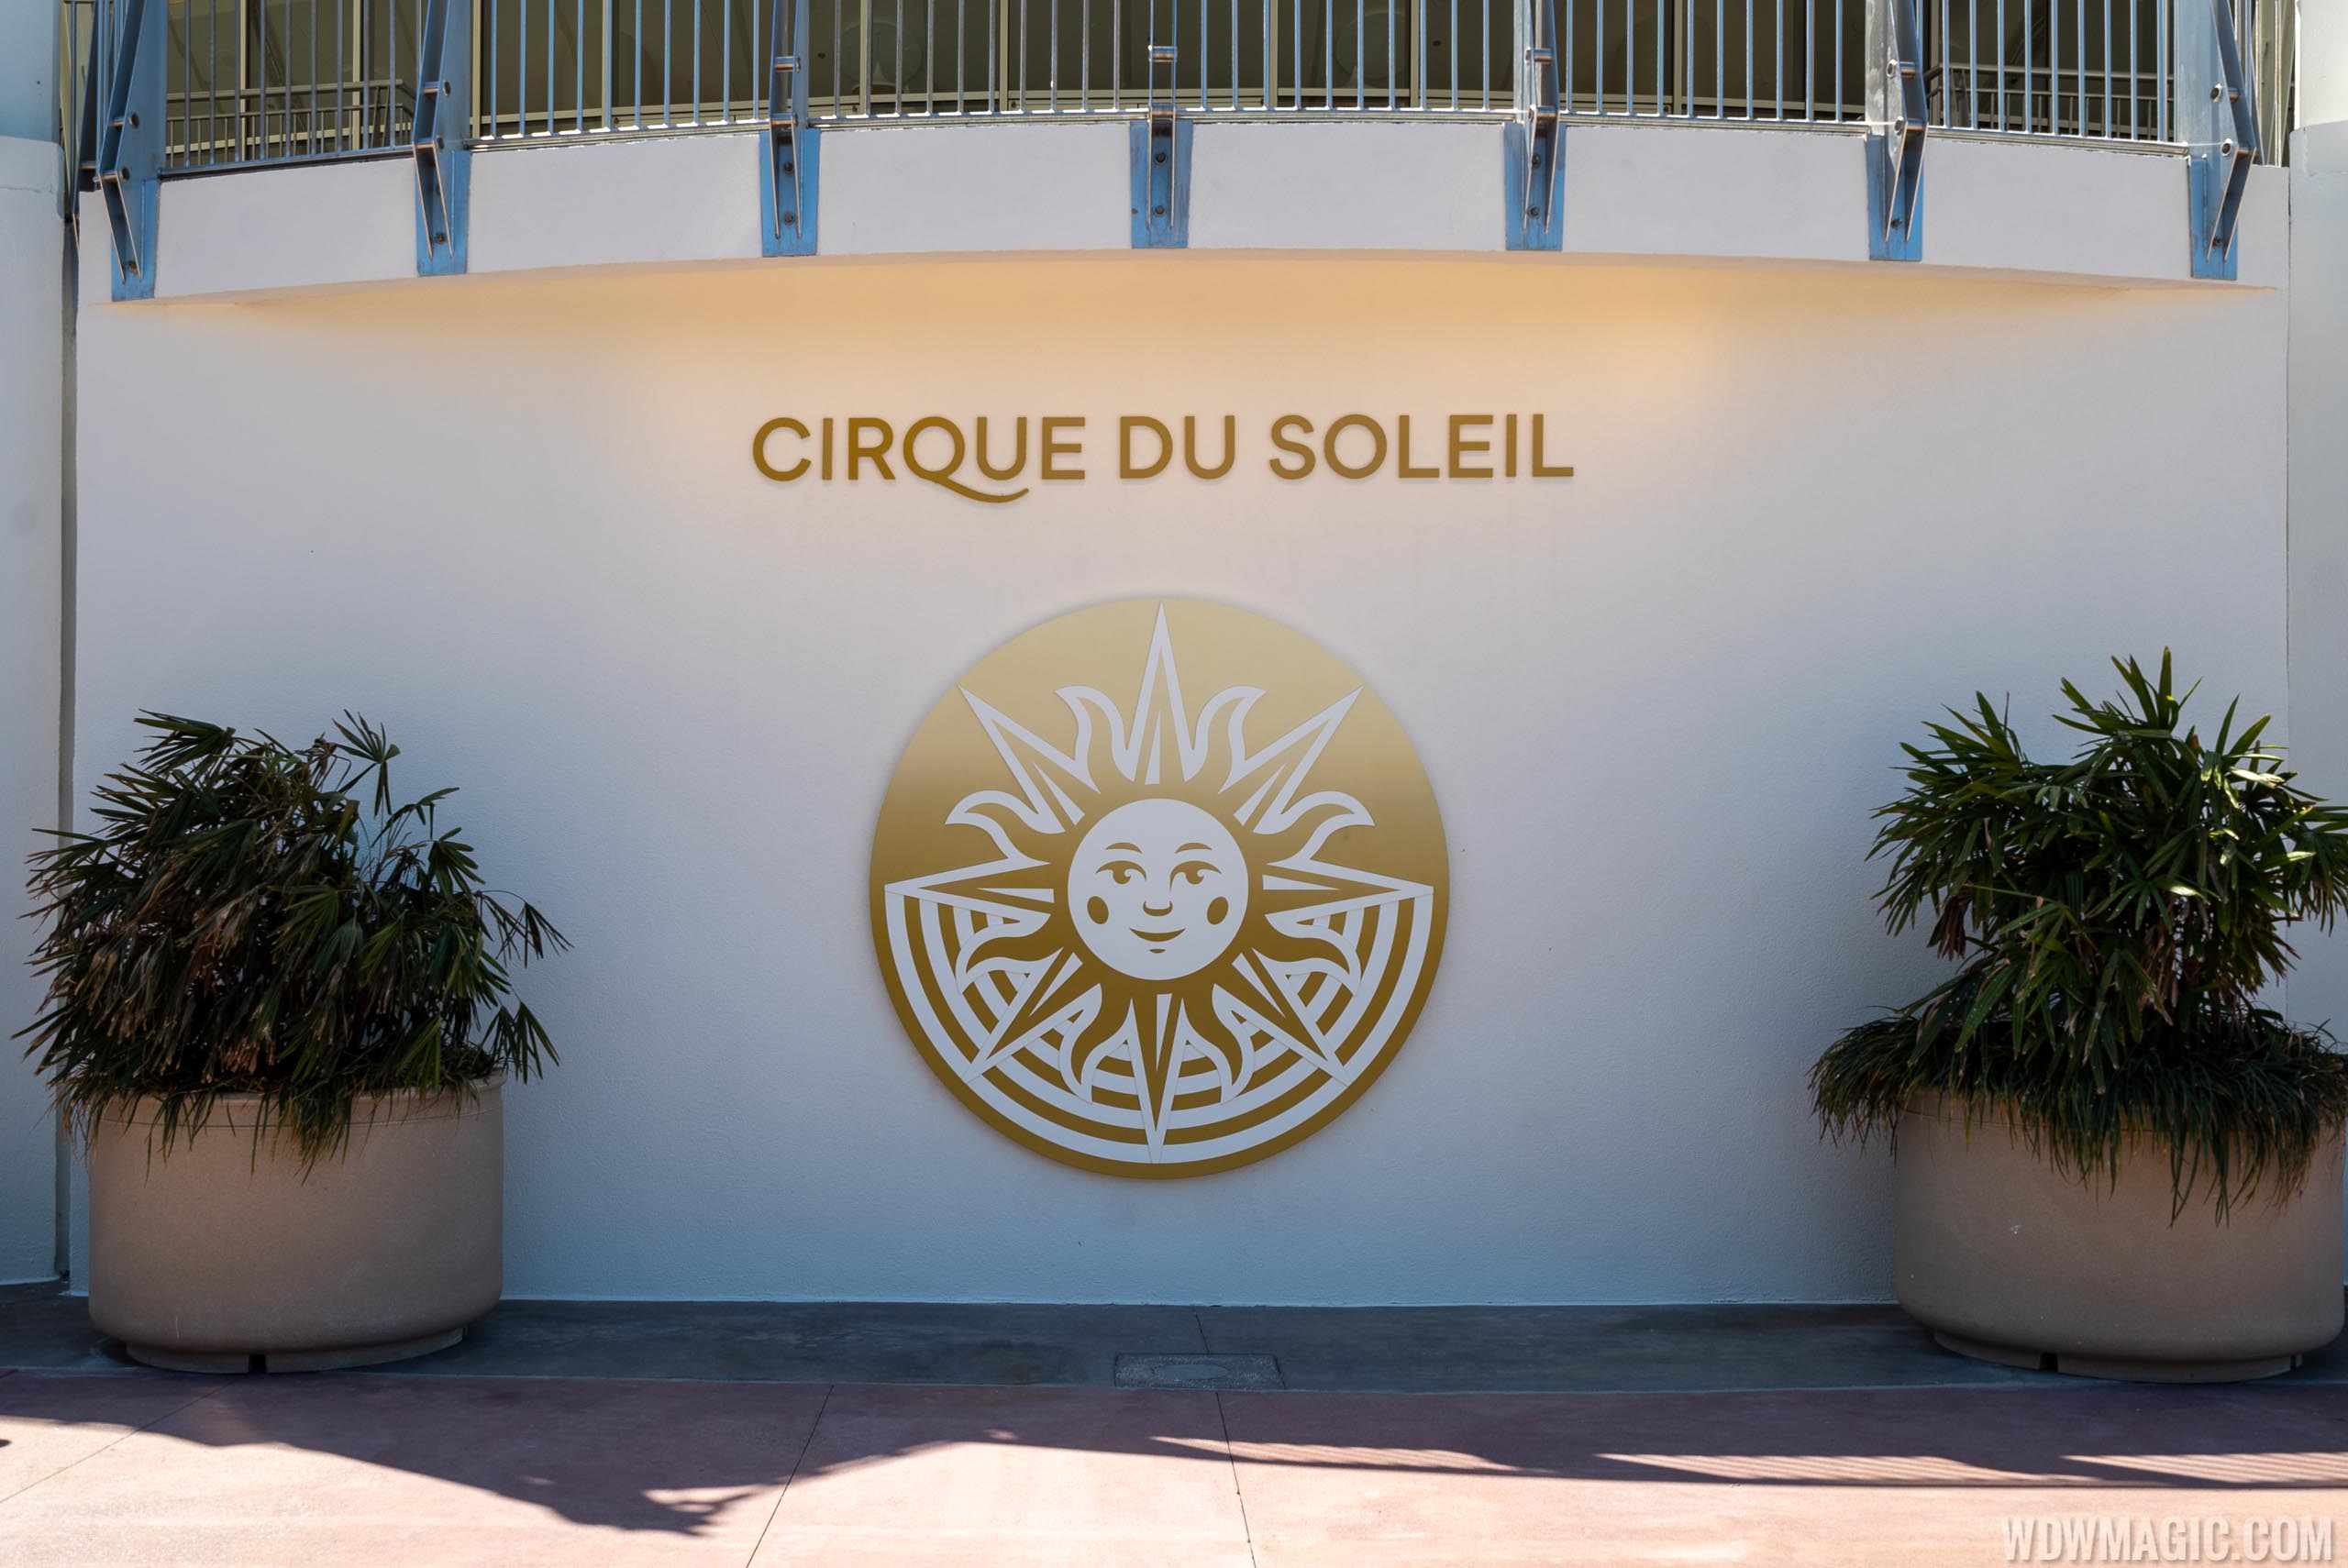 Test your knowledge of Cirque du Soleil ahead of 